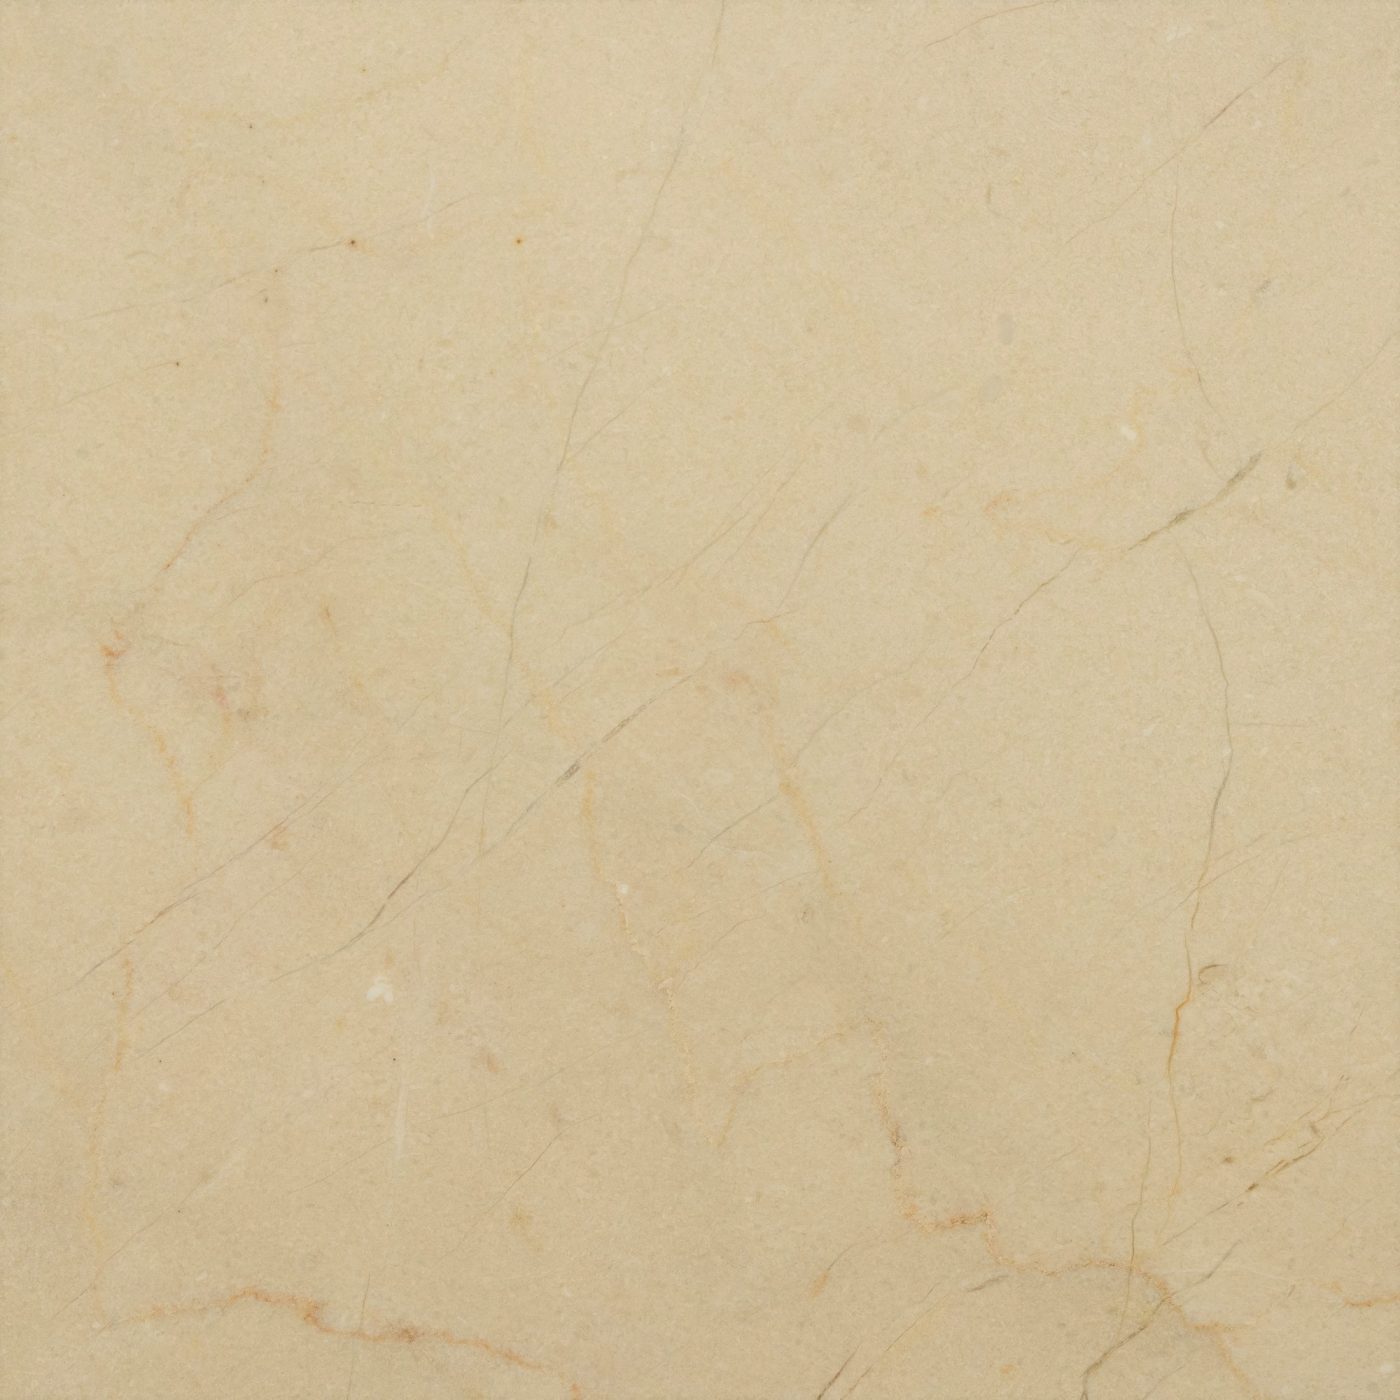 Crema Marfil Honed Marble Tiles